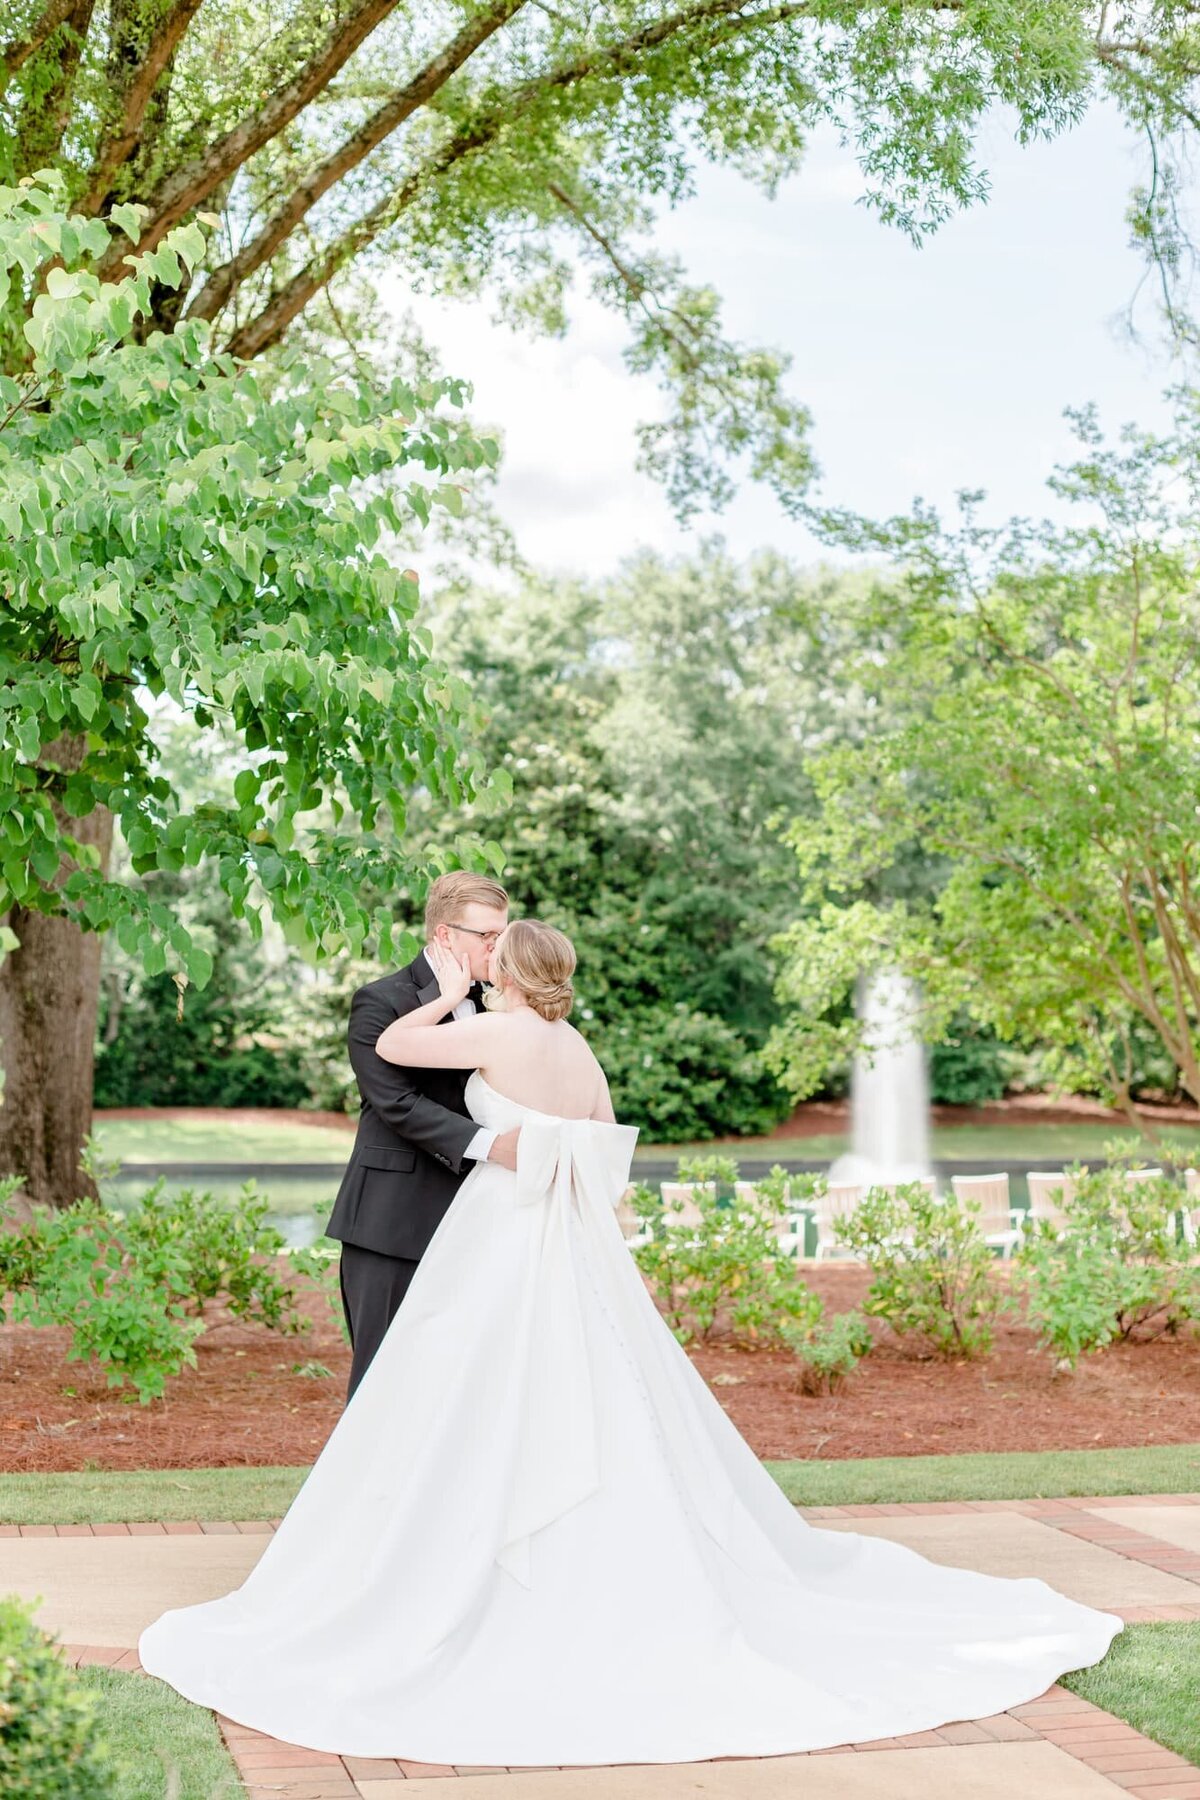 Katie and Alec Wedding Photography Wedding Videography Birmingham, Alabama Husband and Wife Team Photo Video Weddings Engagement Engagements Light Airy Focused on Marriage  Ashley + Chase's Hamilton_ET4N